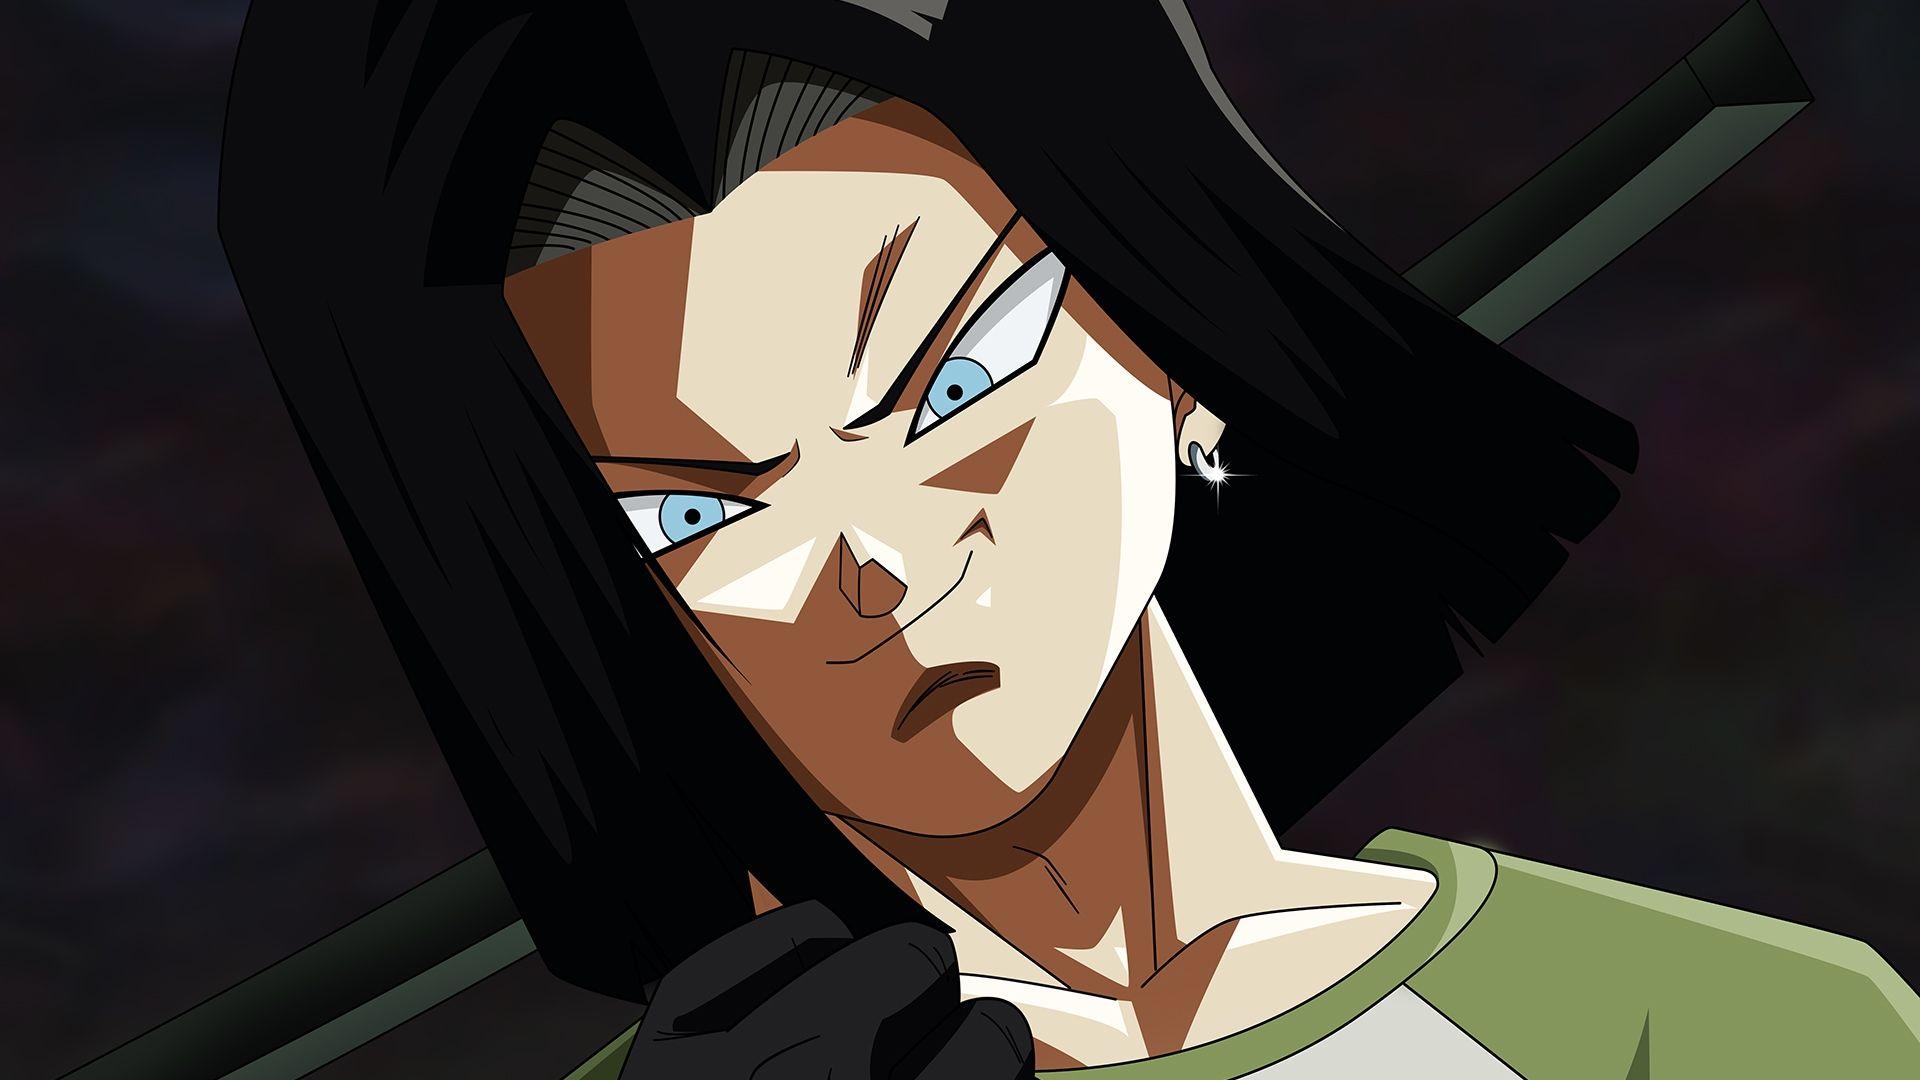 Android 17 Wallpaper Free Android 17 Background